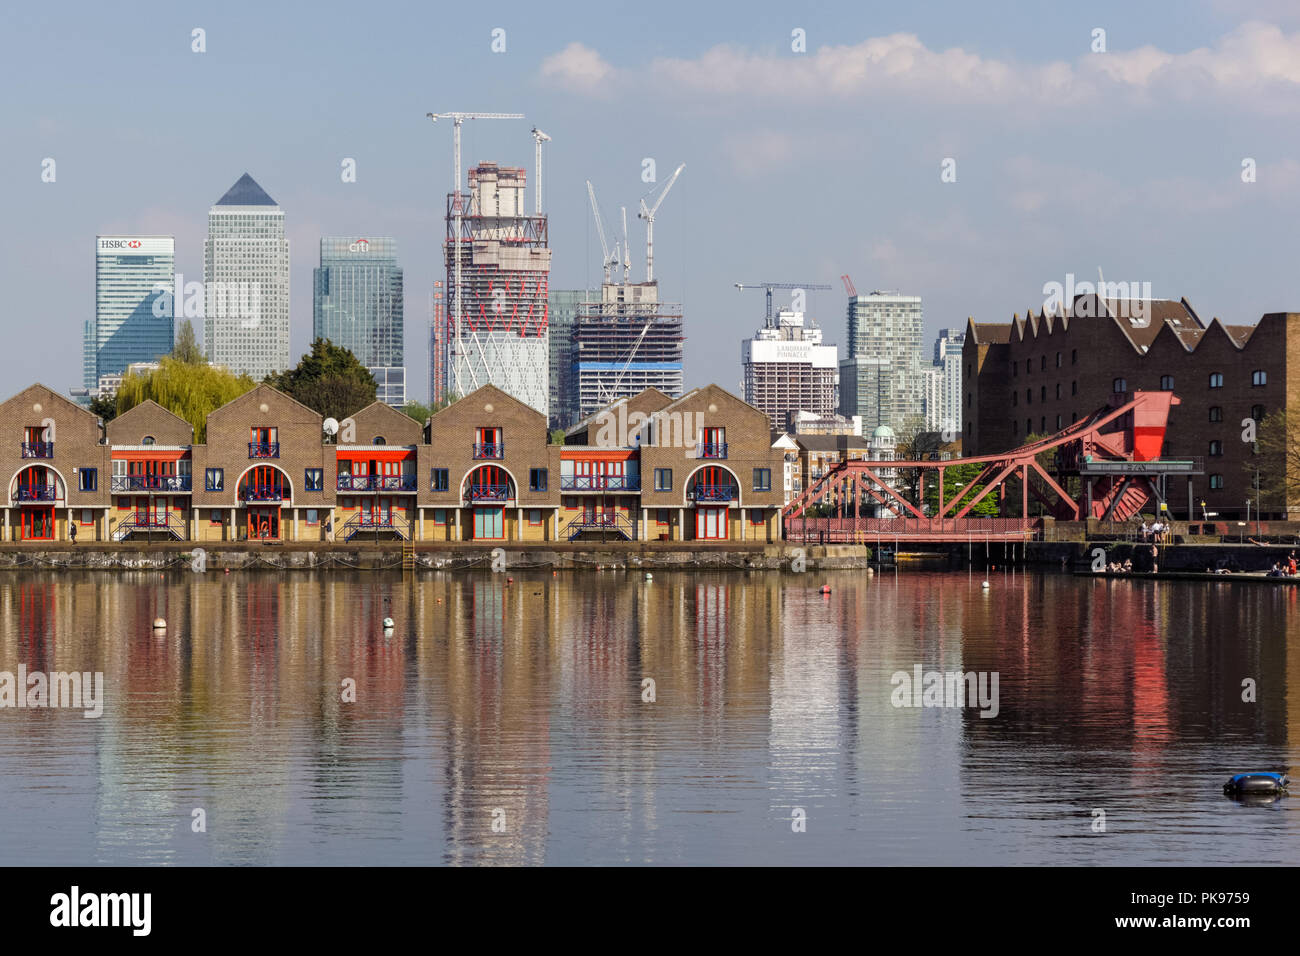 Canary Wharf skyscrapers seen from Shadwell Basin in London, England United Kingdom UK Stock Photo